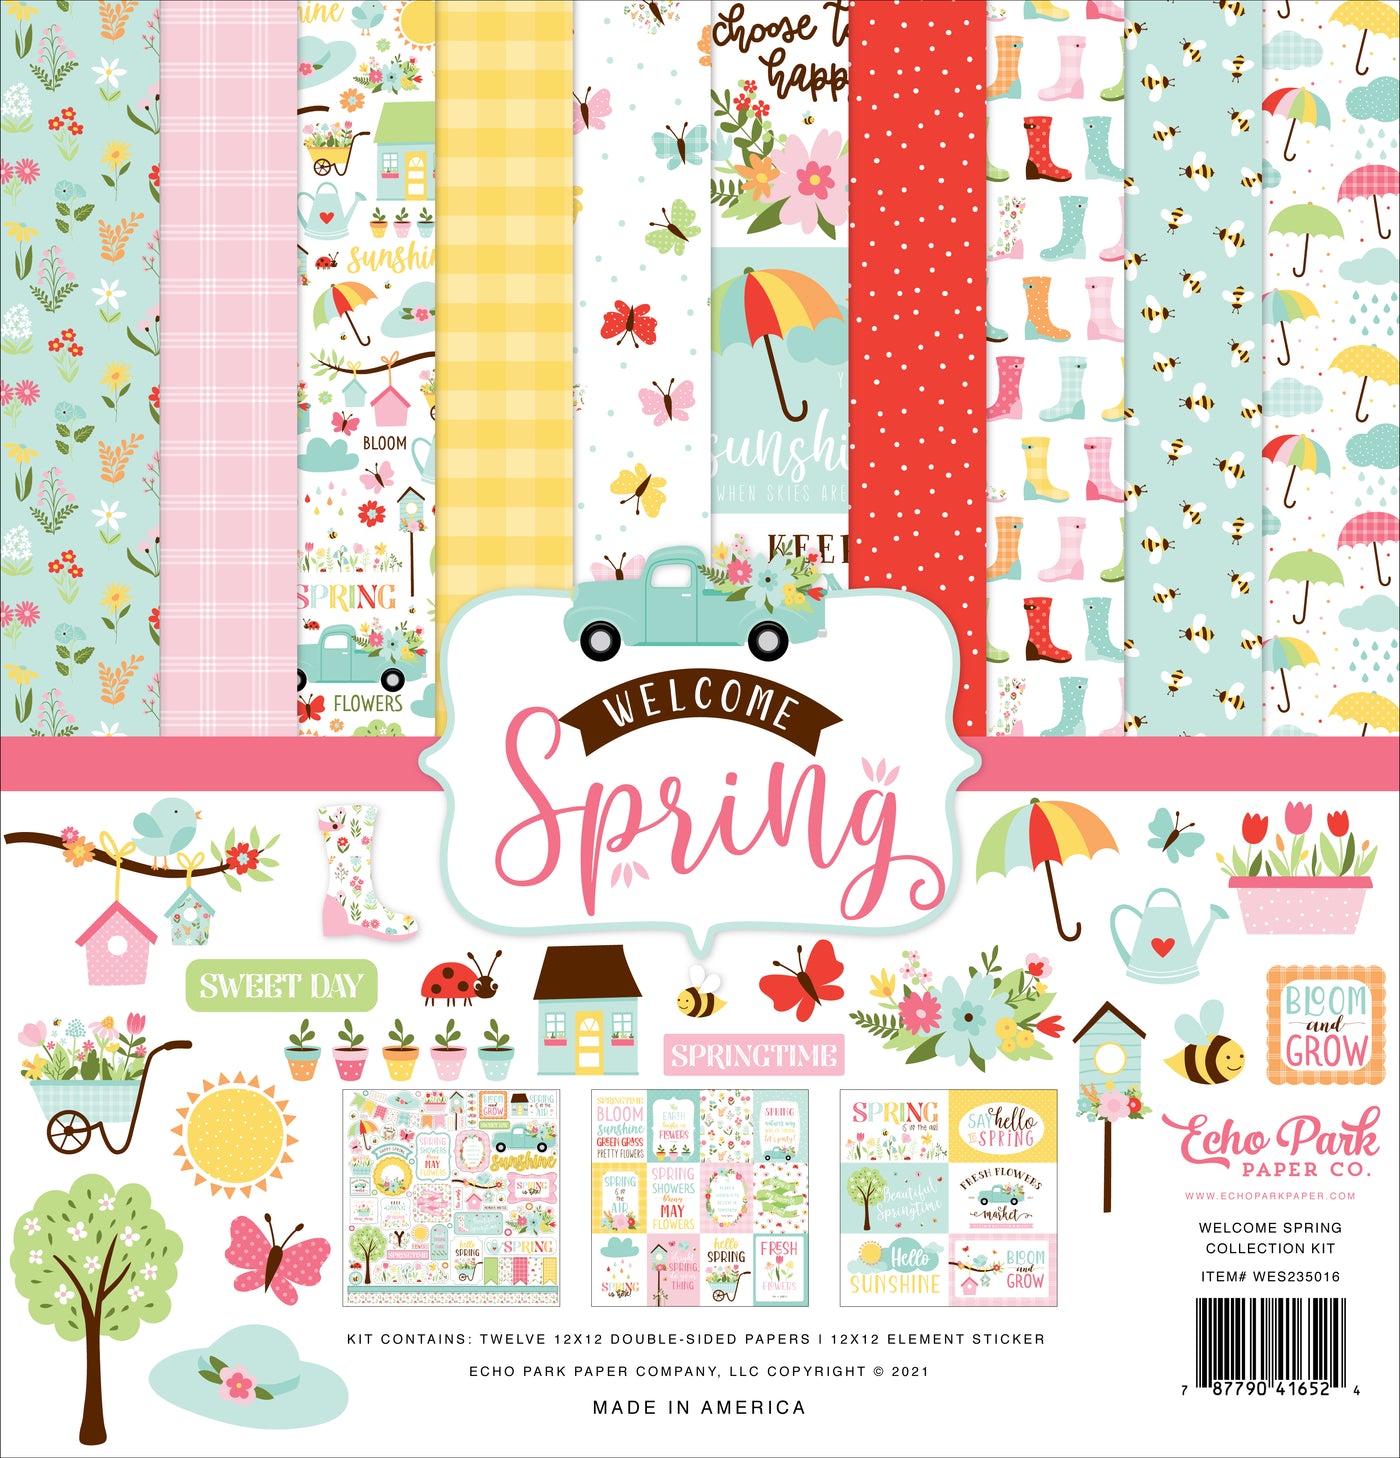  Welcome Spring Collection 12" x 12" Kit by Echo Park kit includes 12 double-sided sheets of paper and one 12" x 12" elements cardstock sheet with images of butterflies, umbrellas, rain clouds, bumblebees, houses, flowers, and more. 